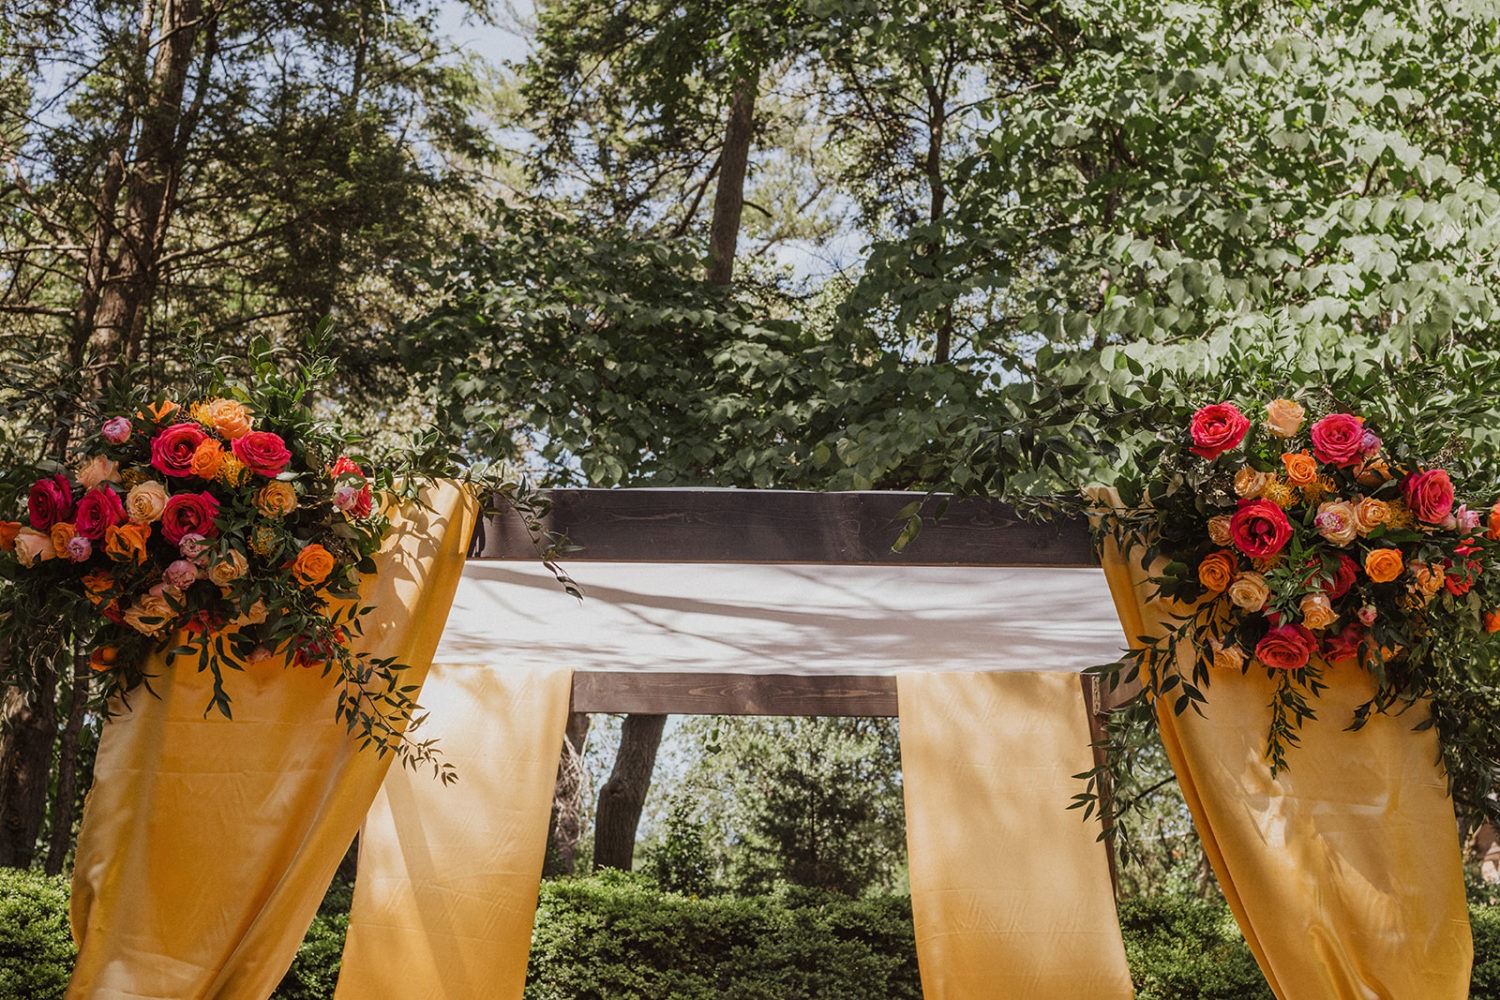 wedding canopy decorated with wedding flowers